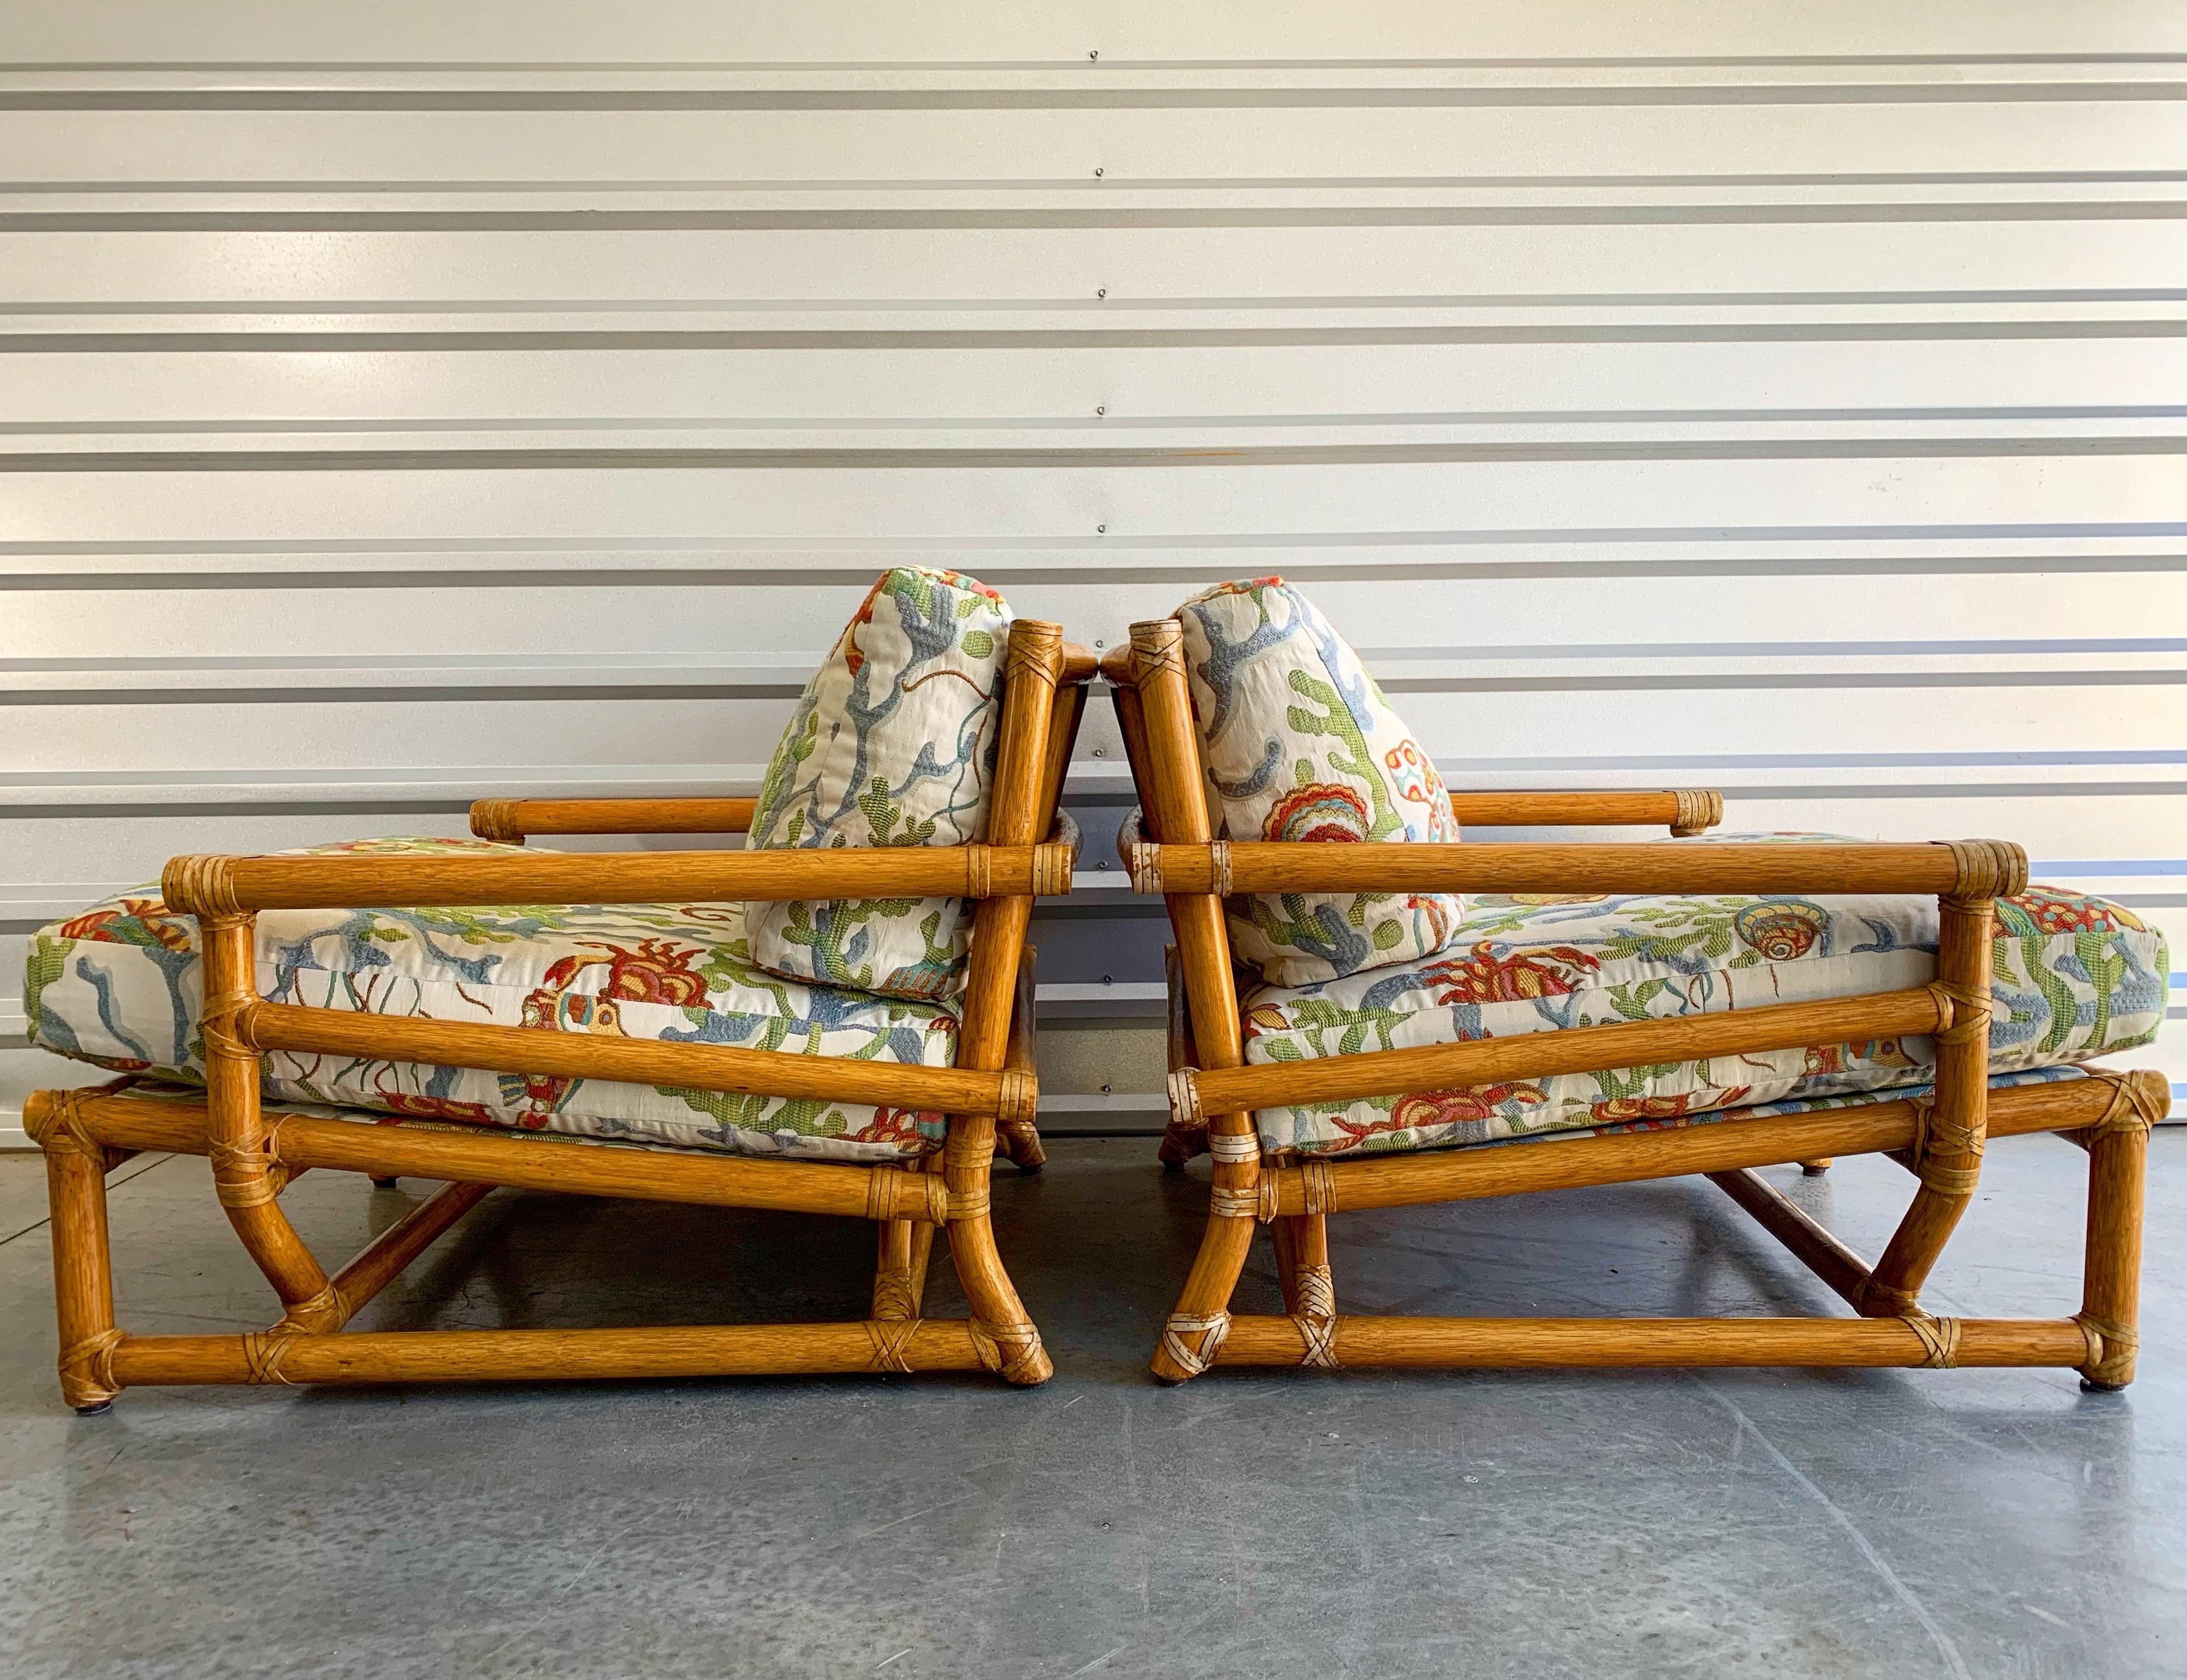 Pair of substantial low slung bamboo rattan lounge chairs by McGuire. Built, circa 1970. Rawhide leather strapping joinery and end caps. Exquisite craftsmanship and top notch materials. Set includes two lounge chairs and one matching ottoman. Brass